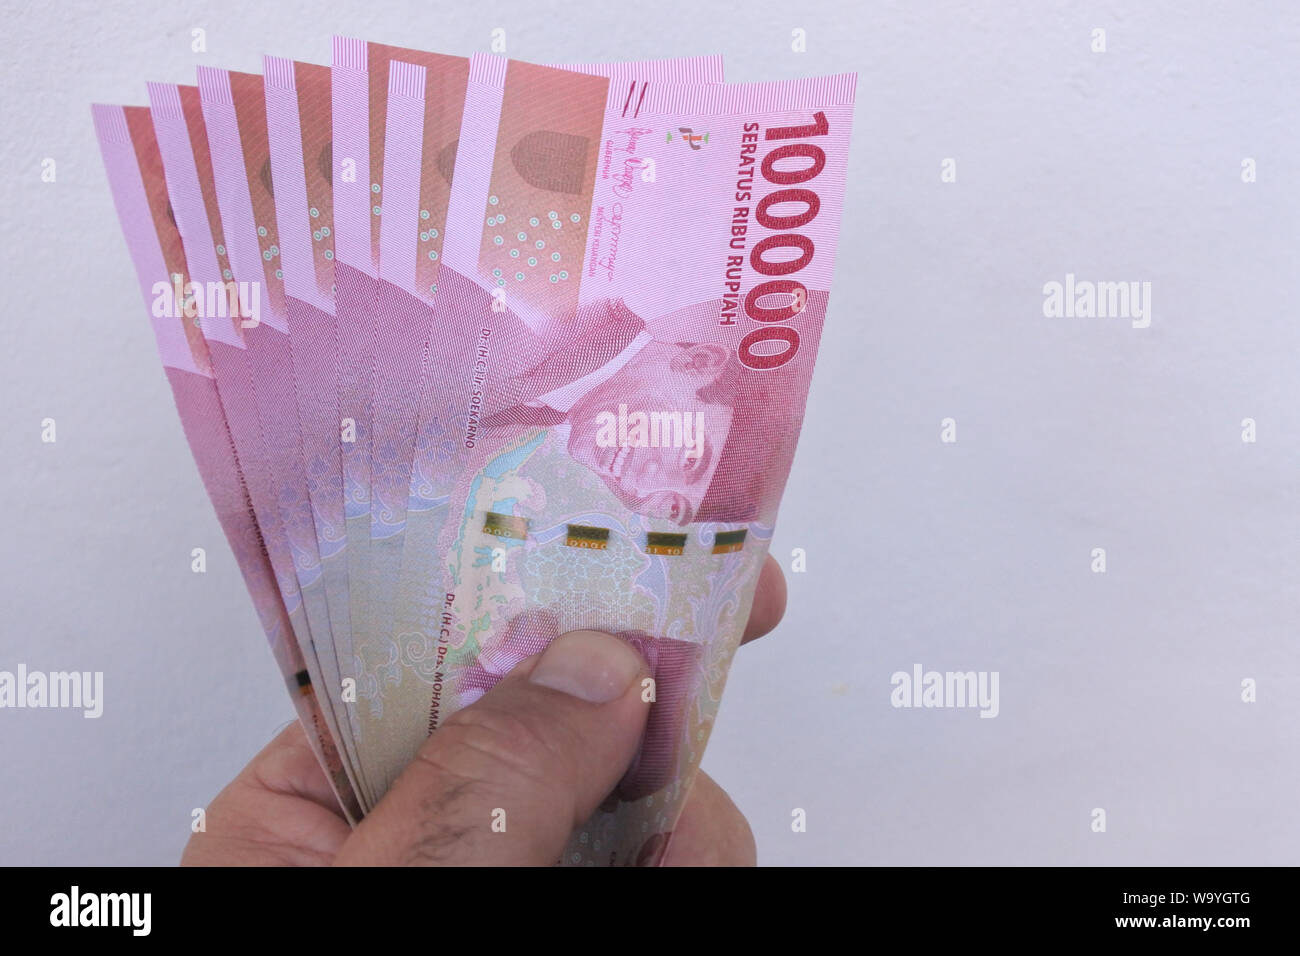 man holding 100000 indonesian rupiah currency of indonesia bank notes W9YGTG